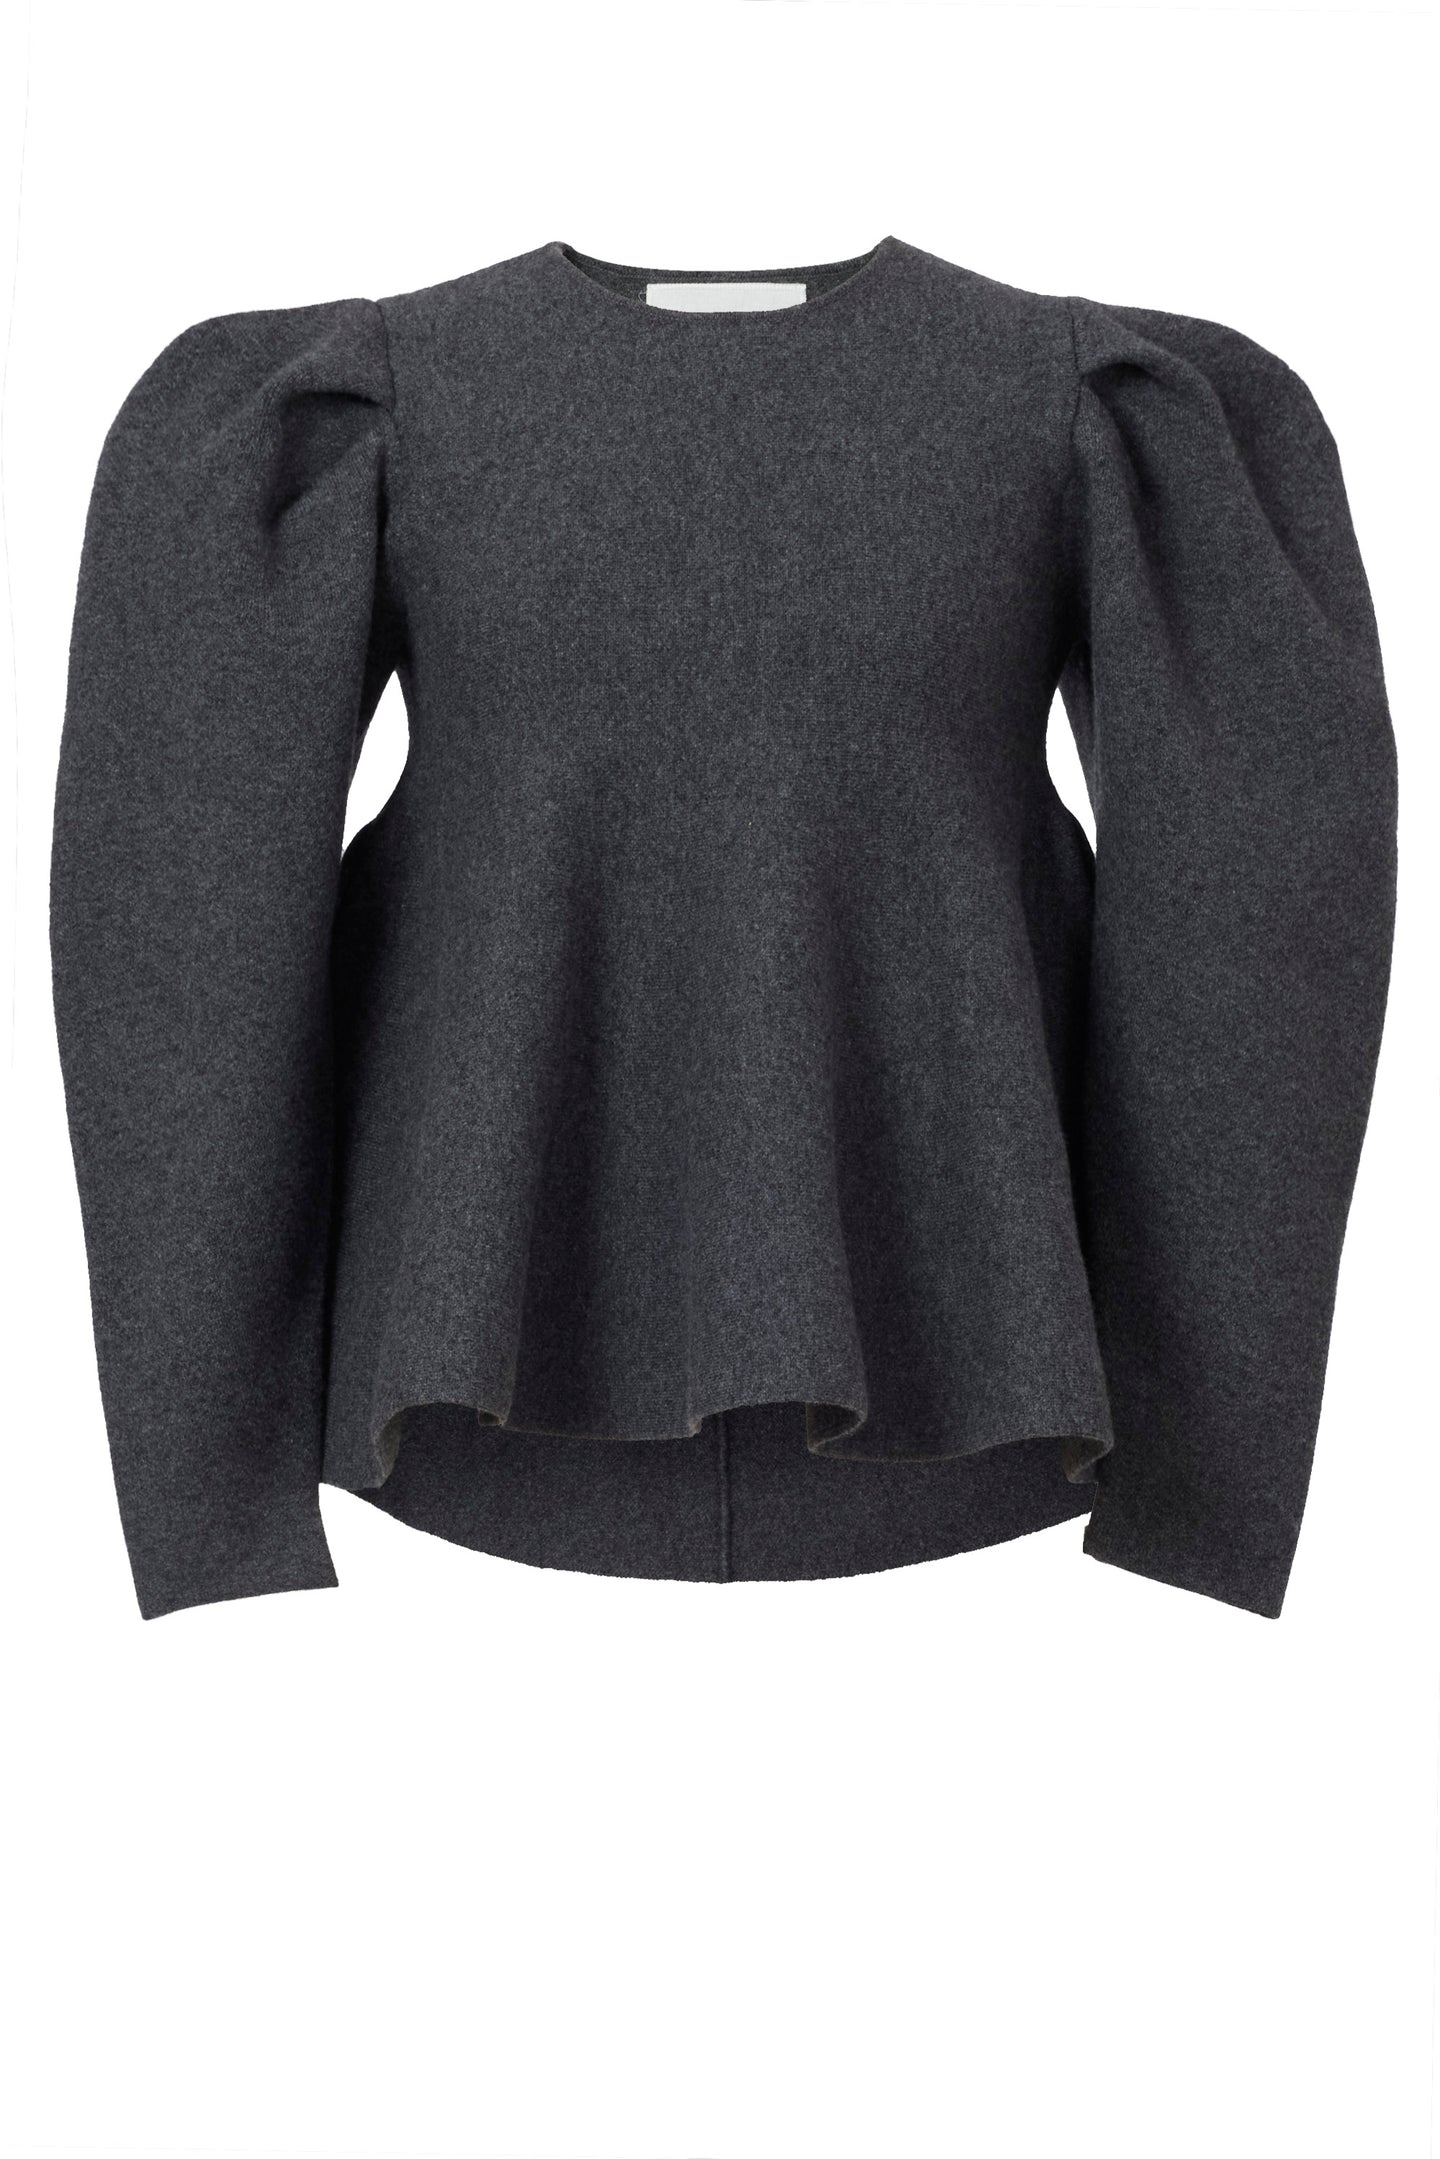 Wool Cashmere Fit and Flare Top | Charcoal Grey